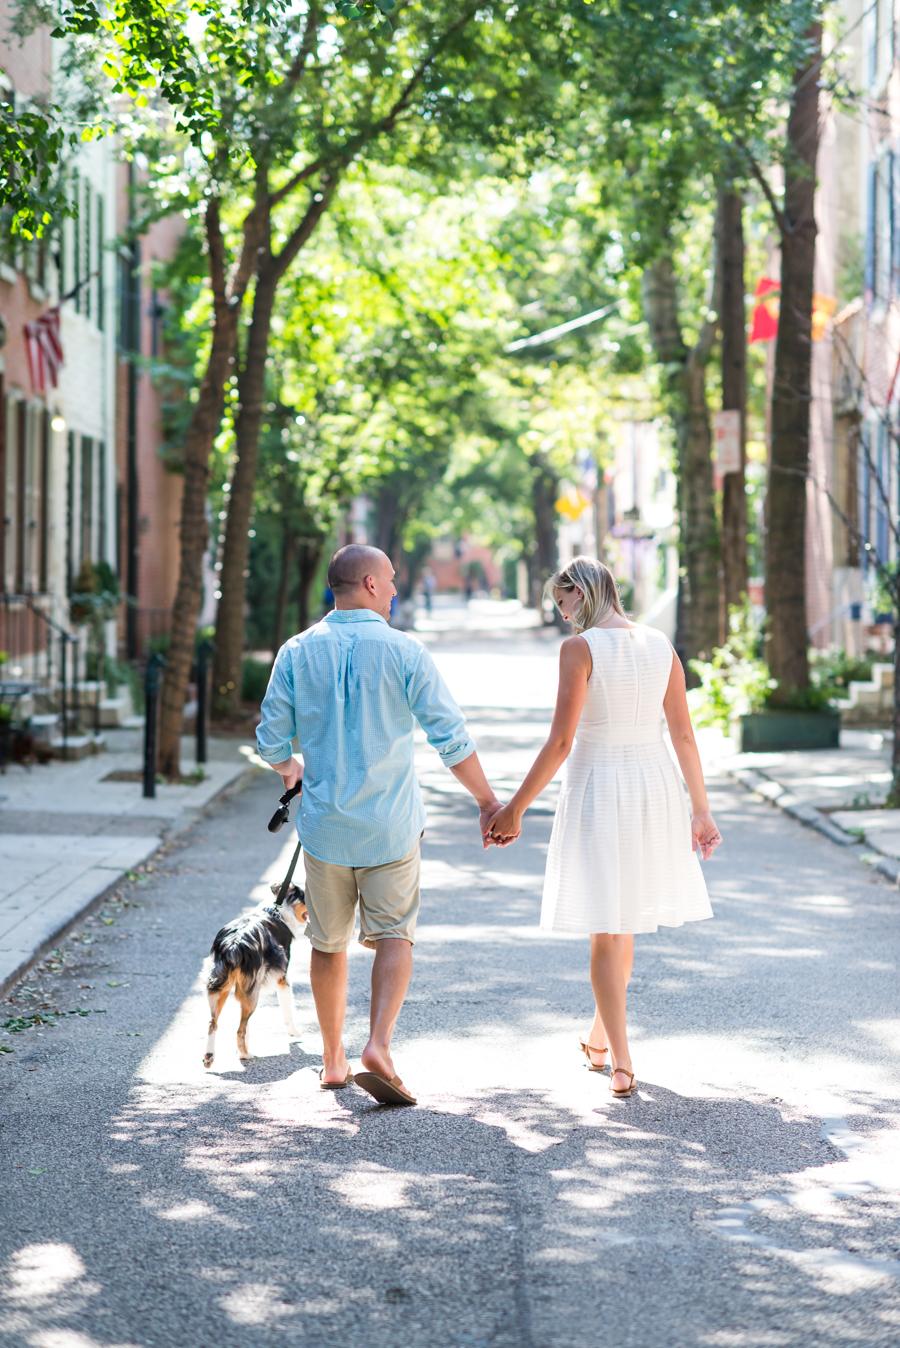 Charming Engagement Session at PHS Pop Up Garden South Street Emerald Stone Photography Philly In Love Philadelphia Wedding Blog Philadelphia Weddings Venues Vendors